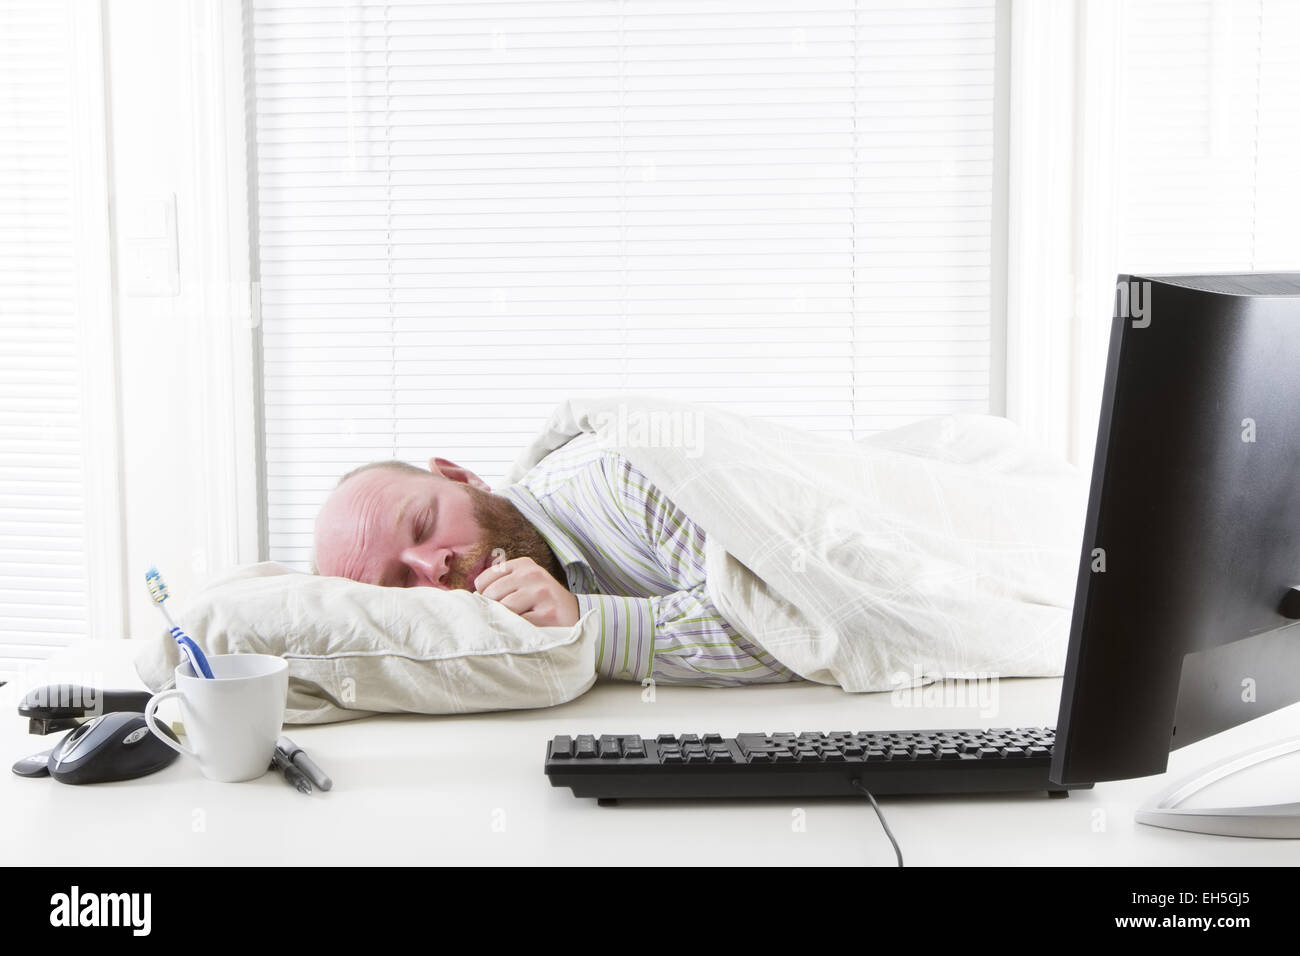 Exhausted and thumb sucking businessman sleeps with pillow and duvet in office. Stock Photo